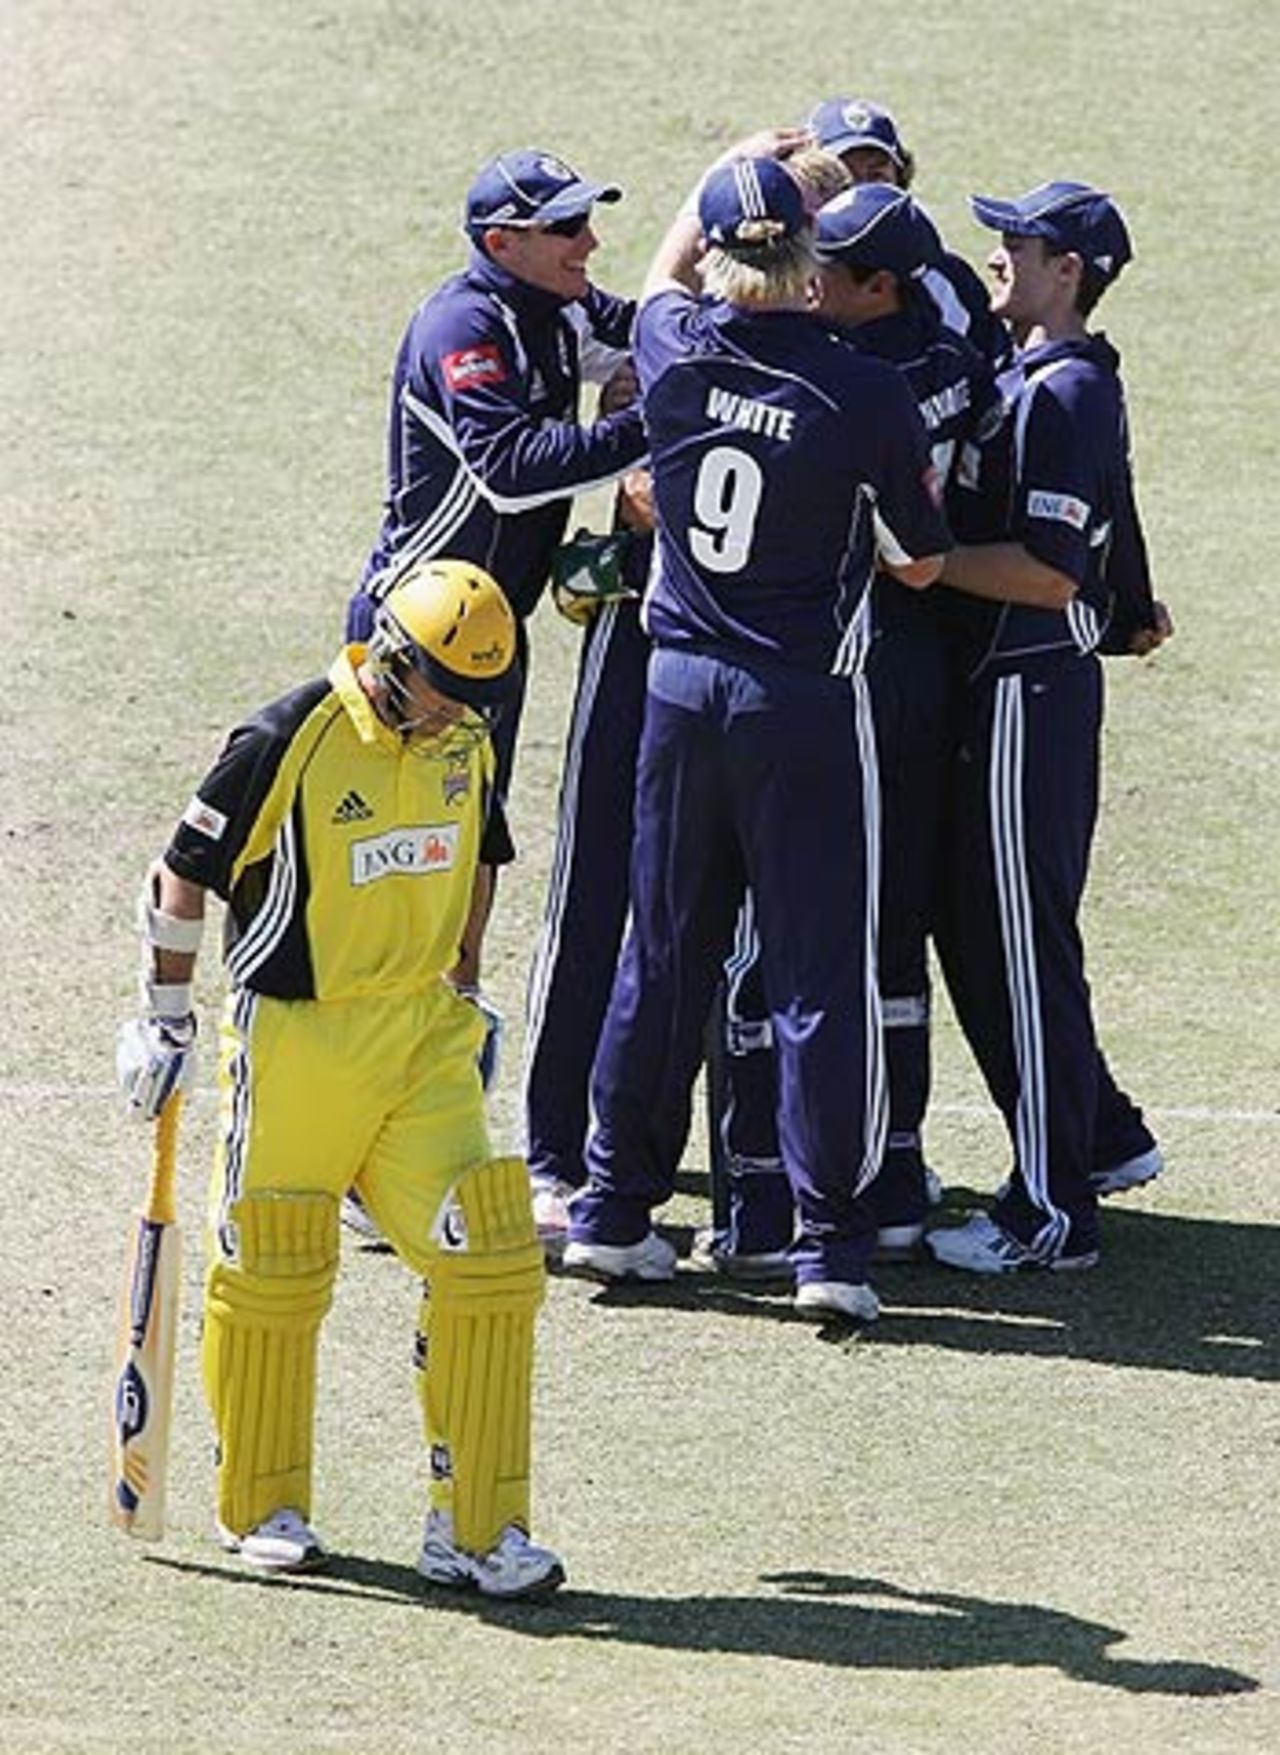 Justin Langer was out playing on to his stumps, Western Australia v Victoria, Perth, October 23, 2005